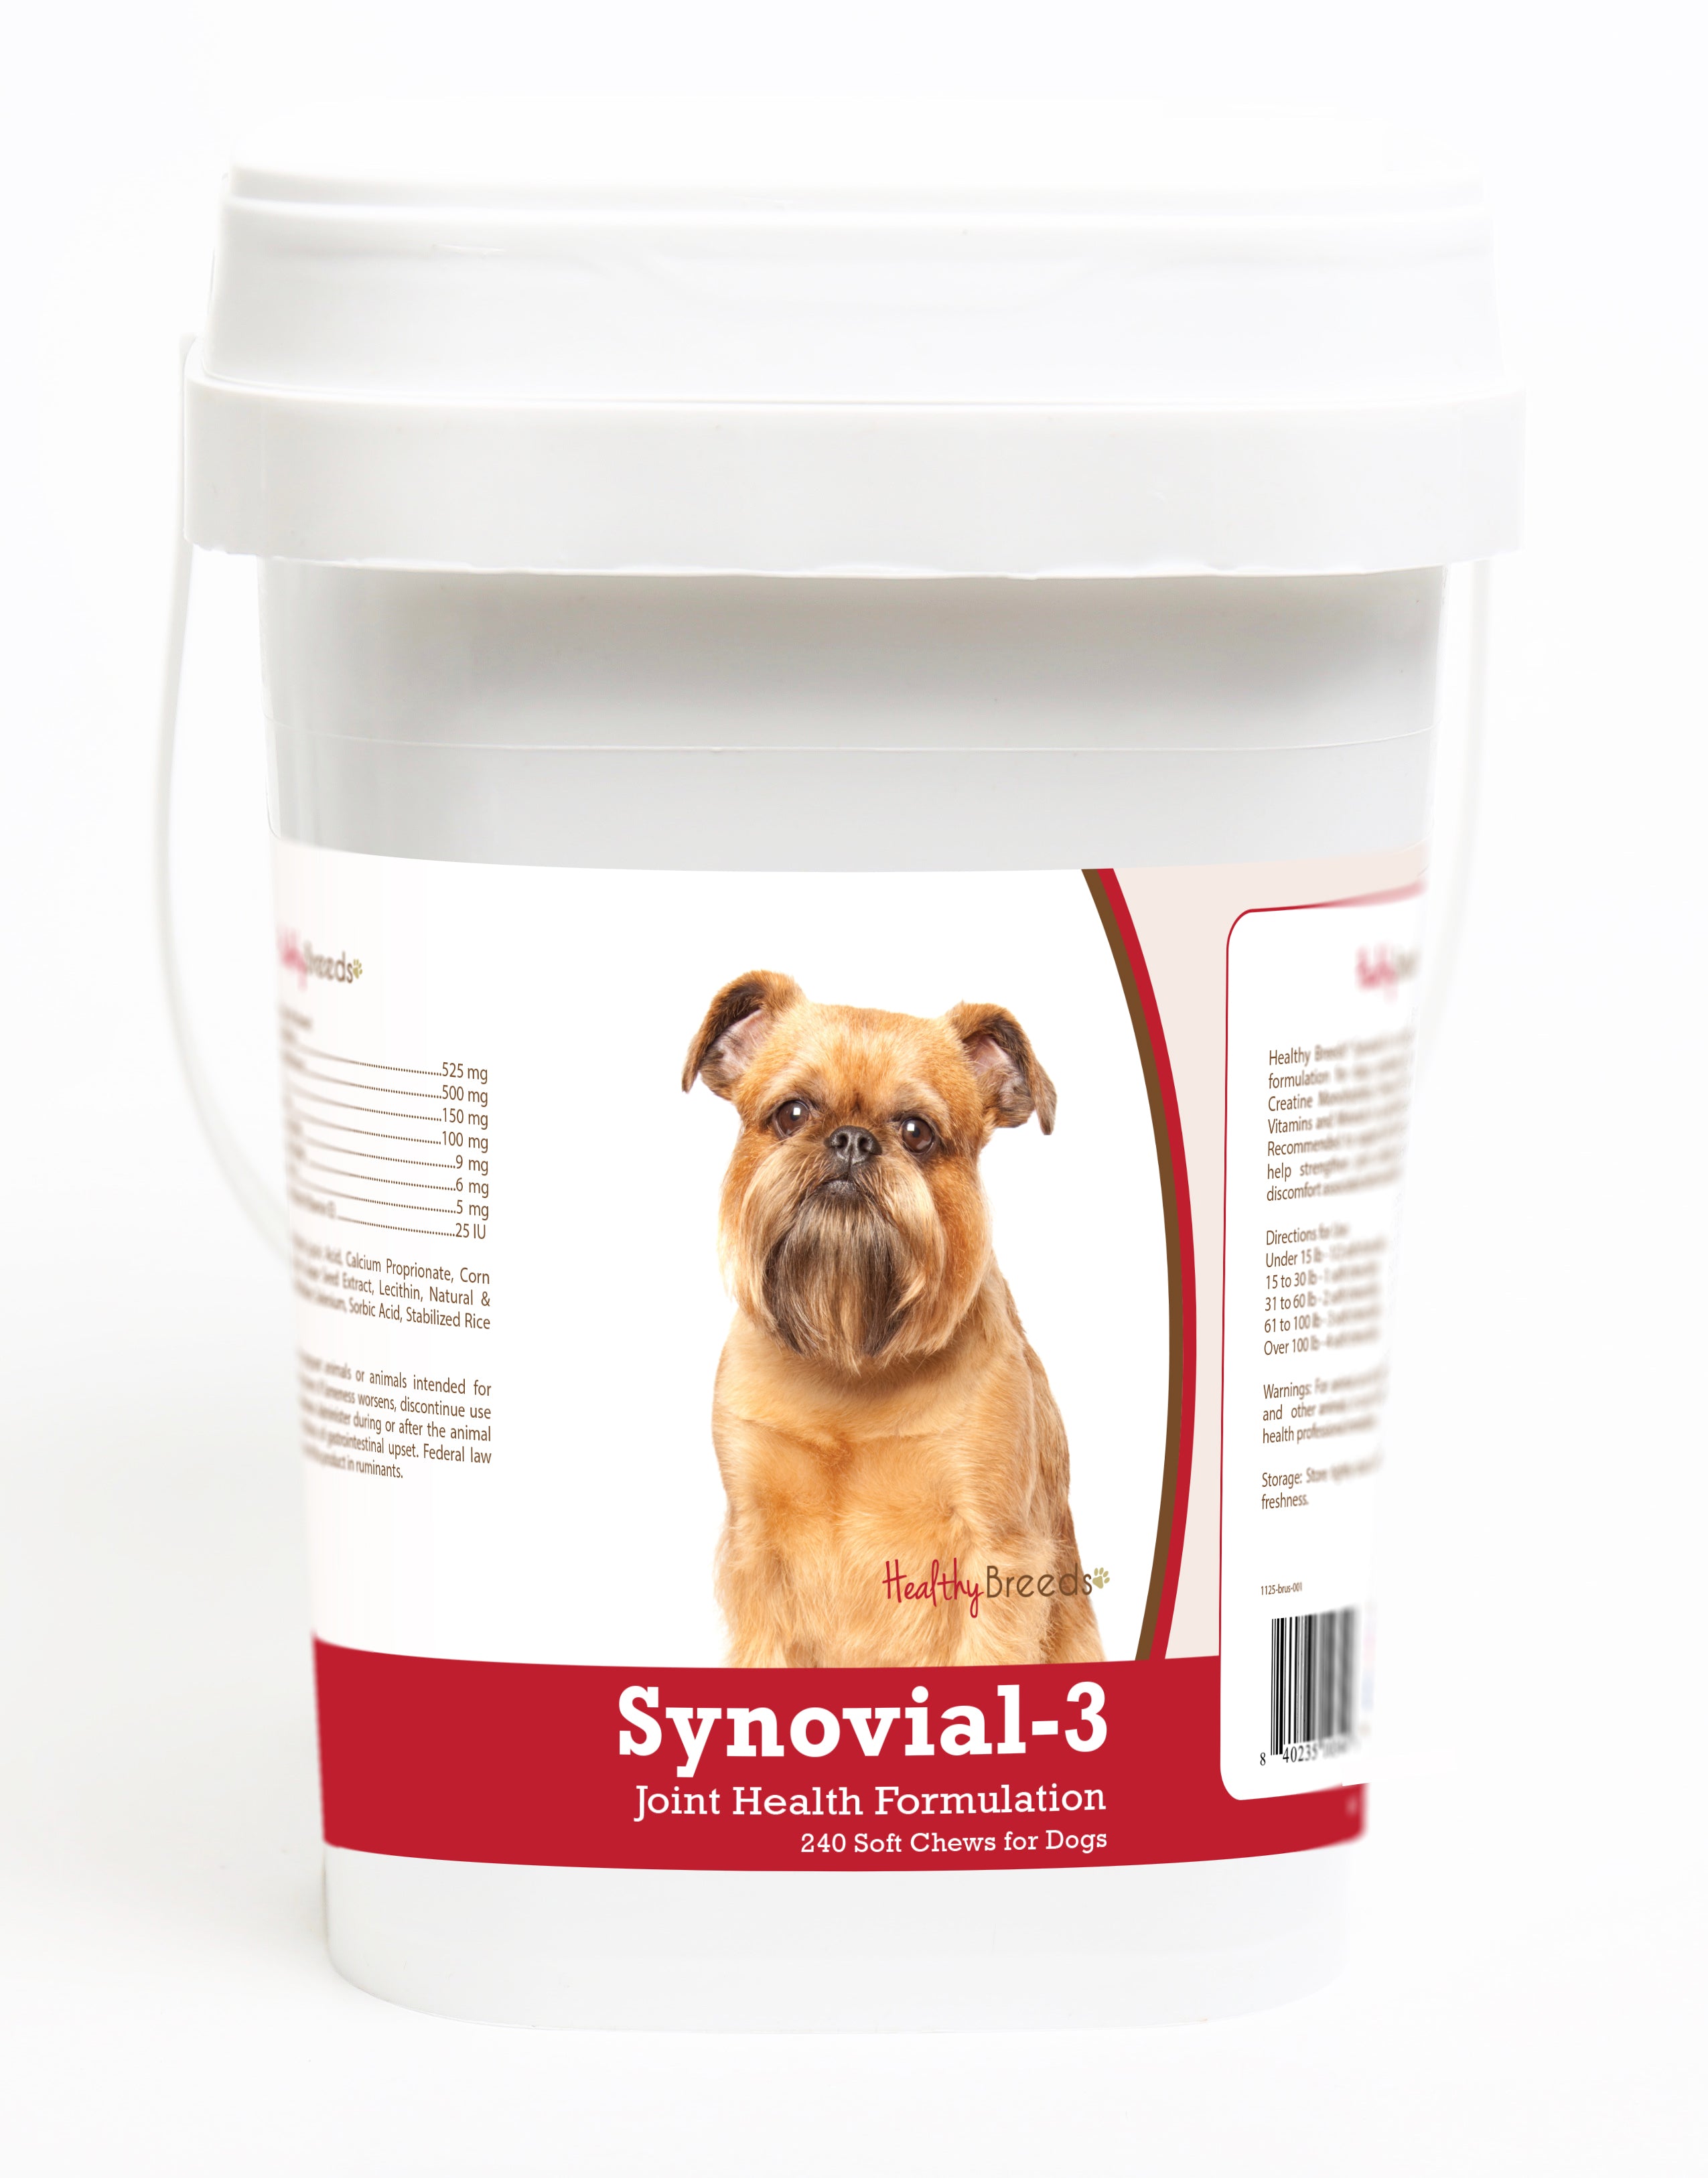 Brussels Griffon Synovial-3 Joint Health Formulation Soft Chews 240 Count